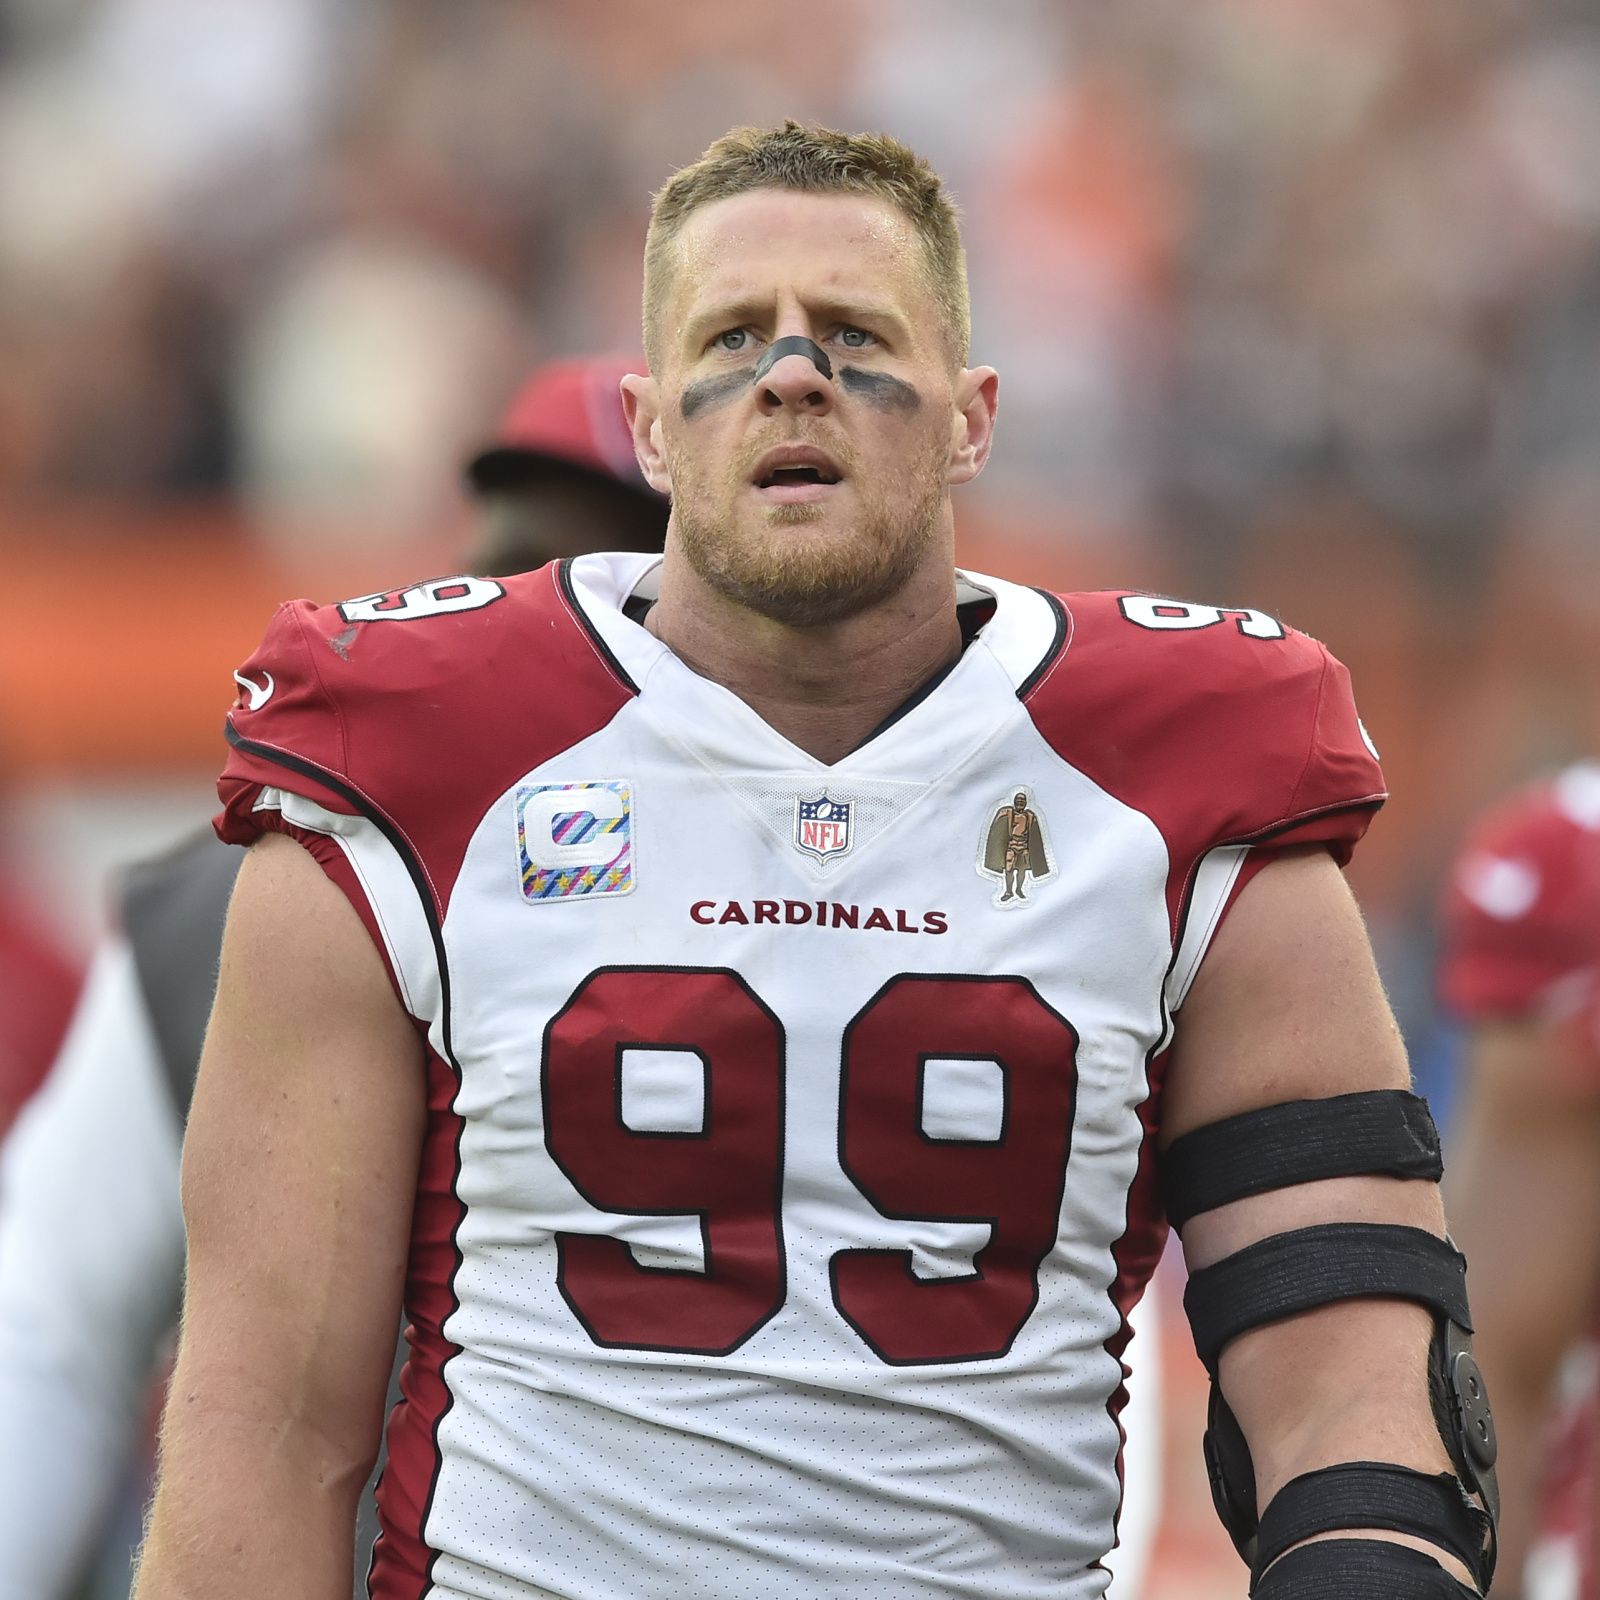 Cardinals lose J.J. Watt to shoulder injury, keeping him out of Packers game